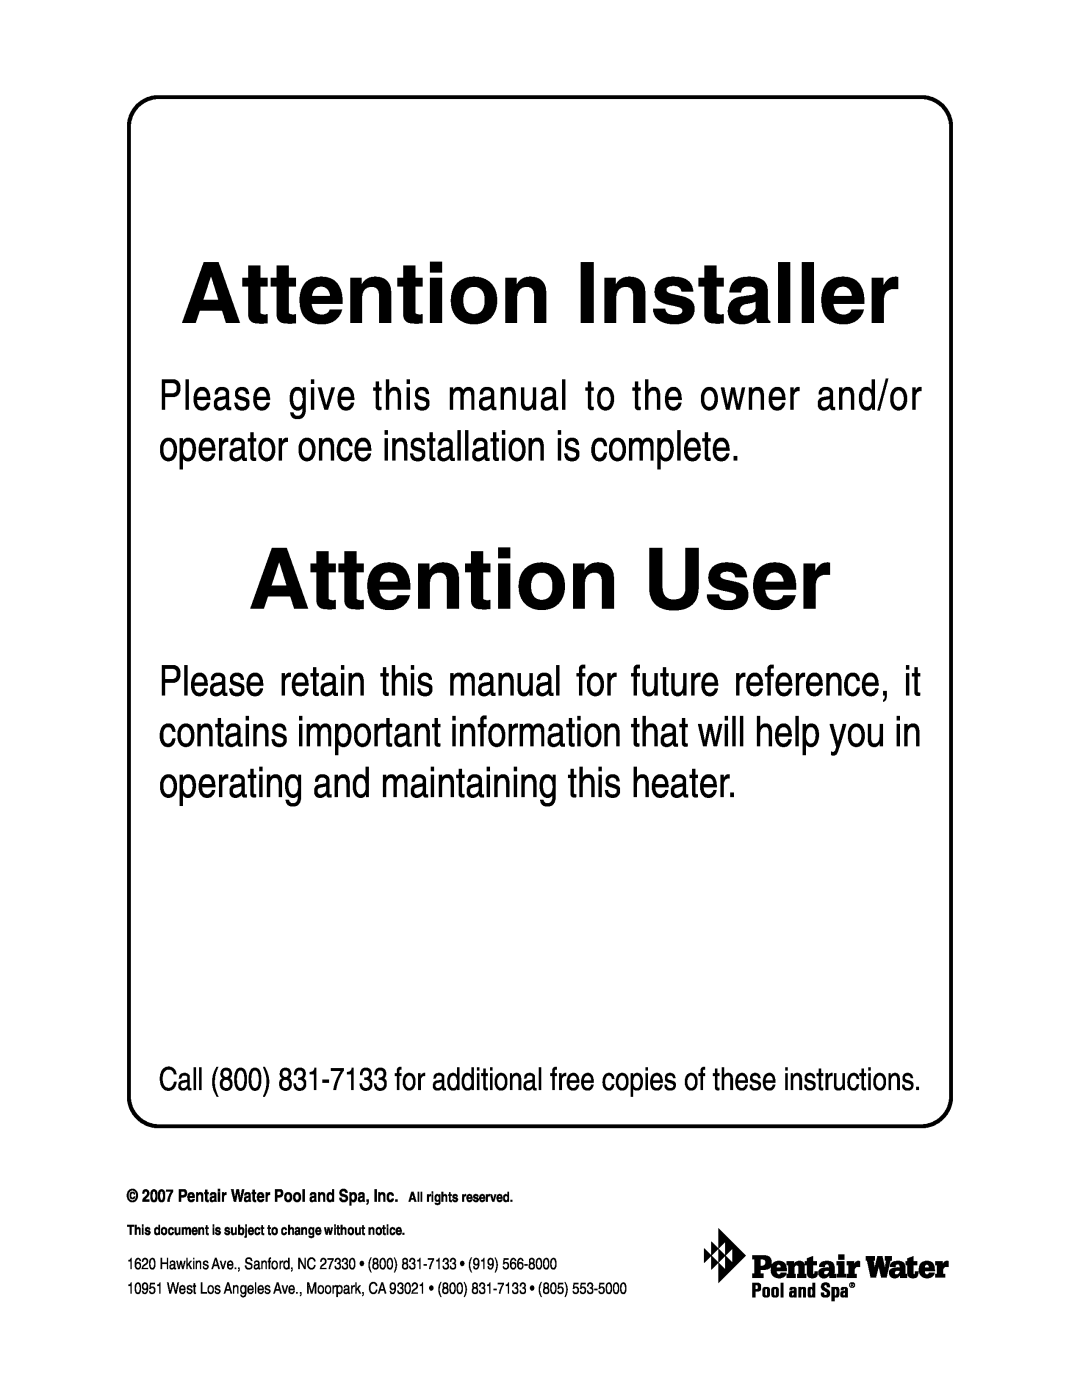 Pentair Hot Tub Attention Installer, Attention User, Call 800 831-7133 for additional free copies of these instructions 